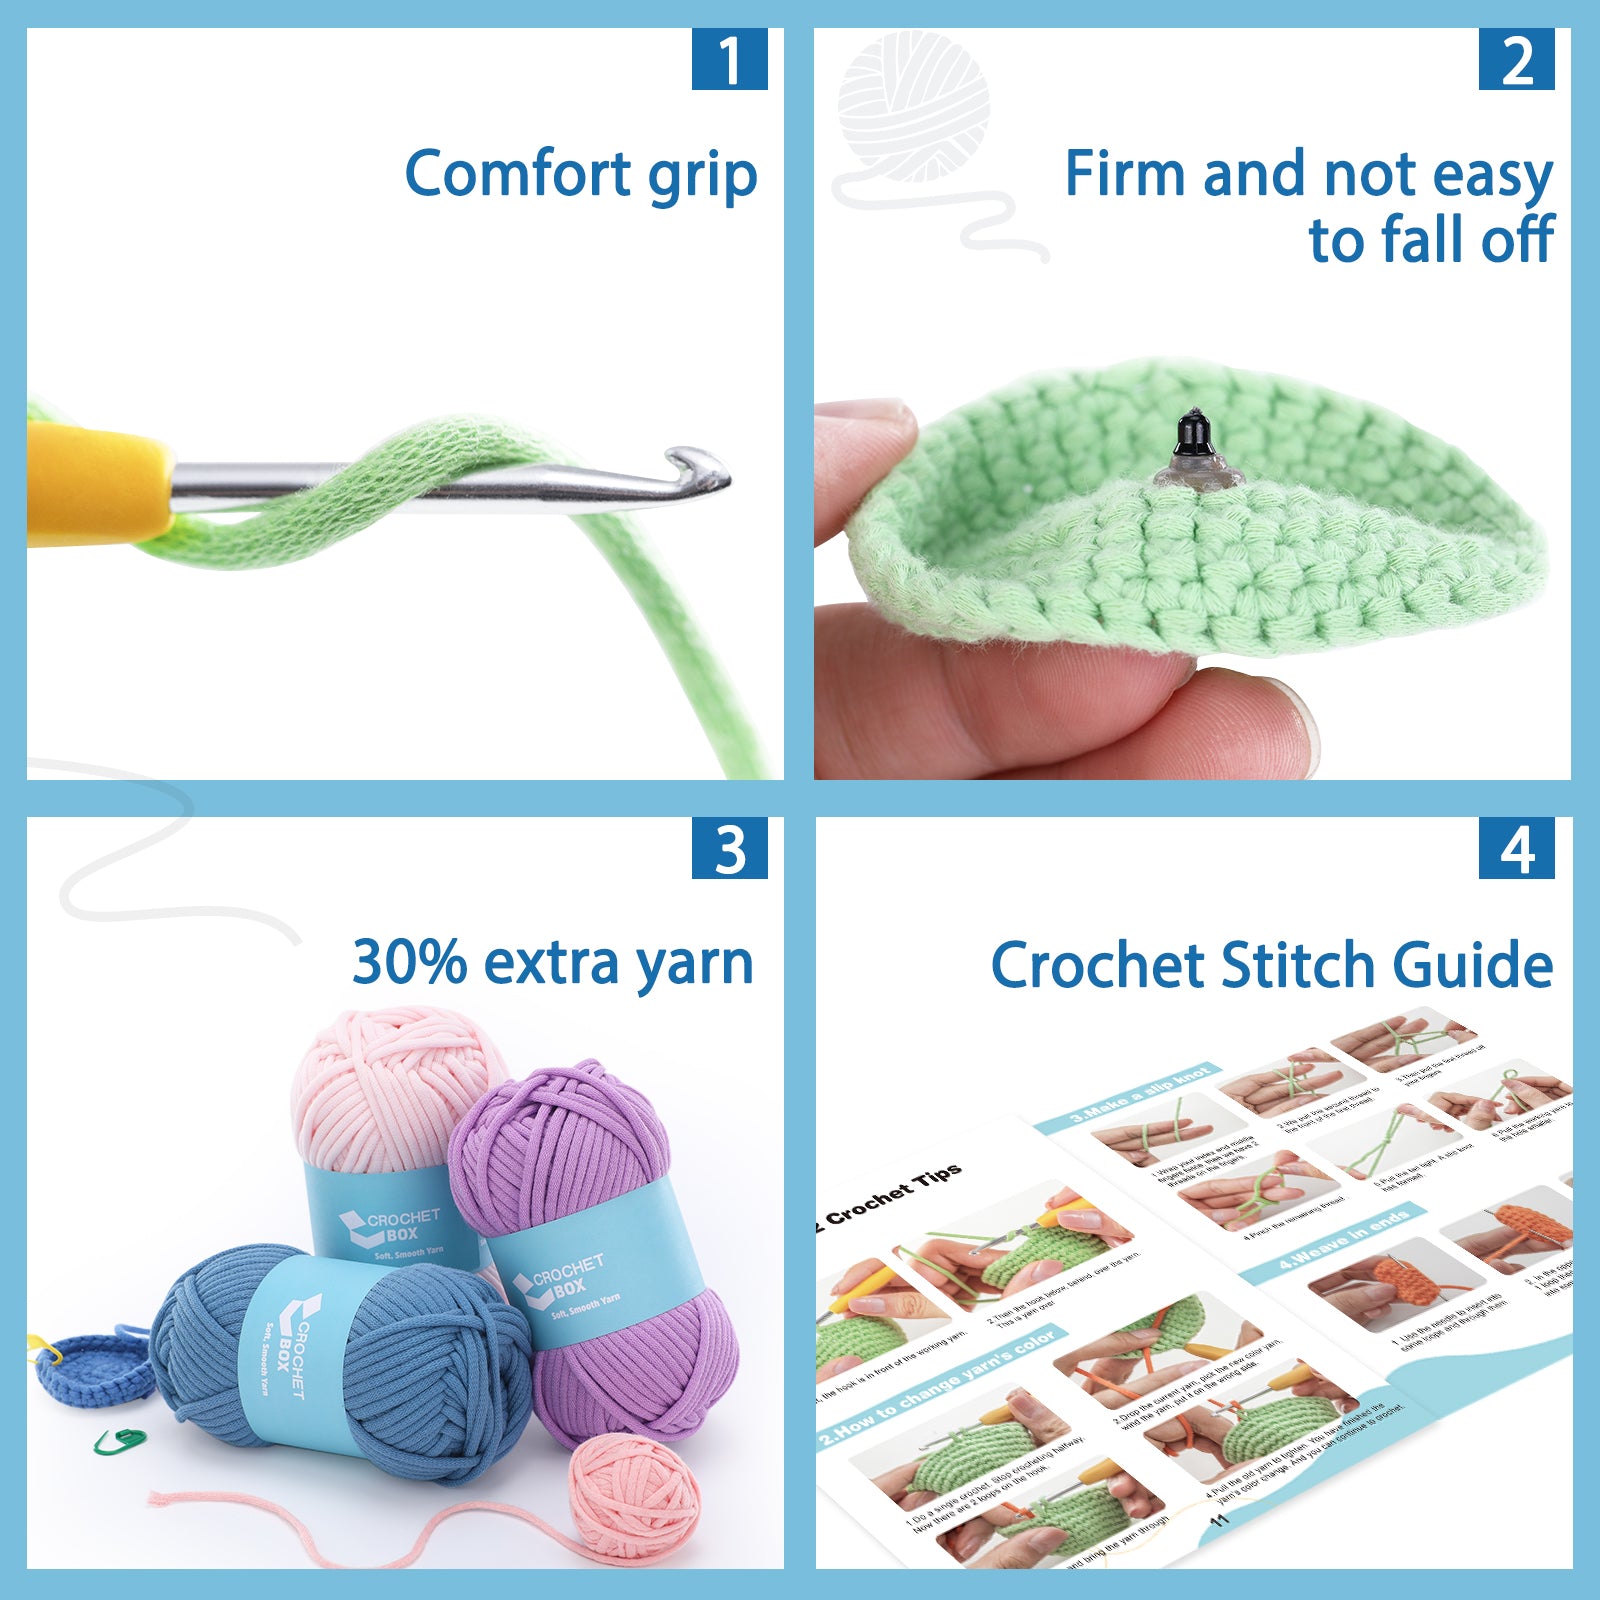 Complete Crochet Kit for Beginners: Starter Crochet Kit, Include Easy Crocheting Soft Yarn, Step-by-Step Video Tutorial, Accessories, Mystery Alien Style, Birthday, Holiday Gift for Adults, Teens